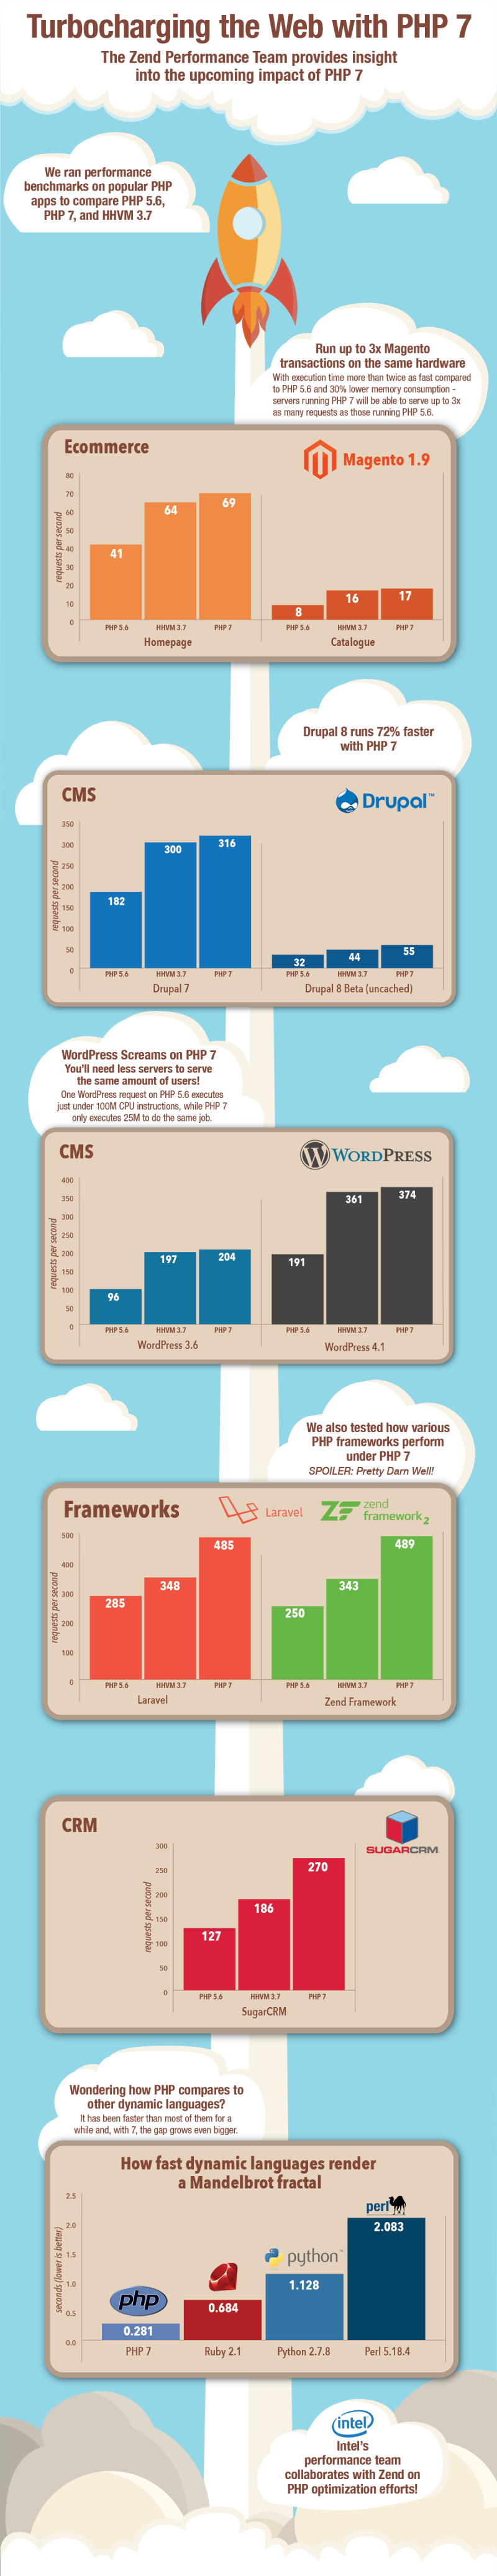 PHP 7 Performance Infographic